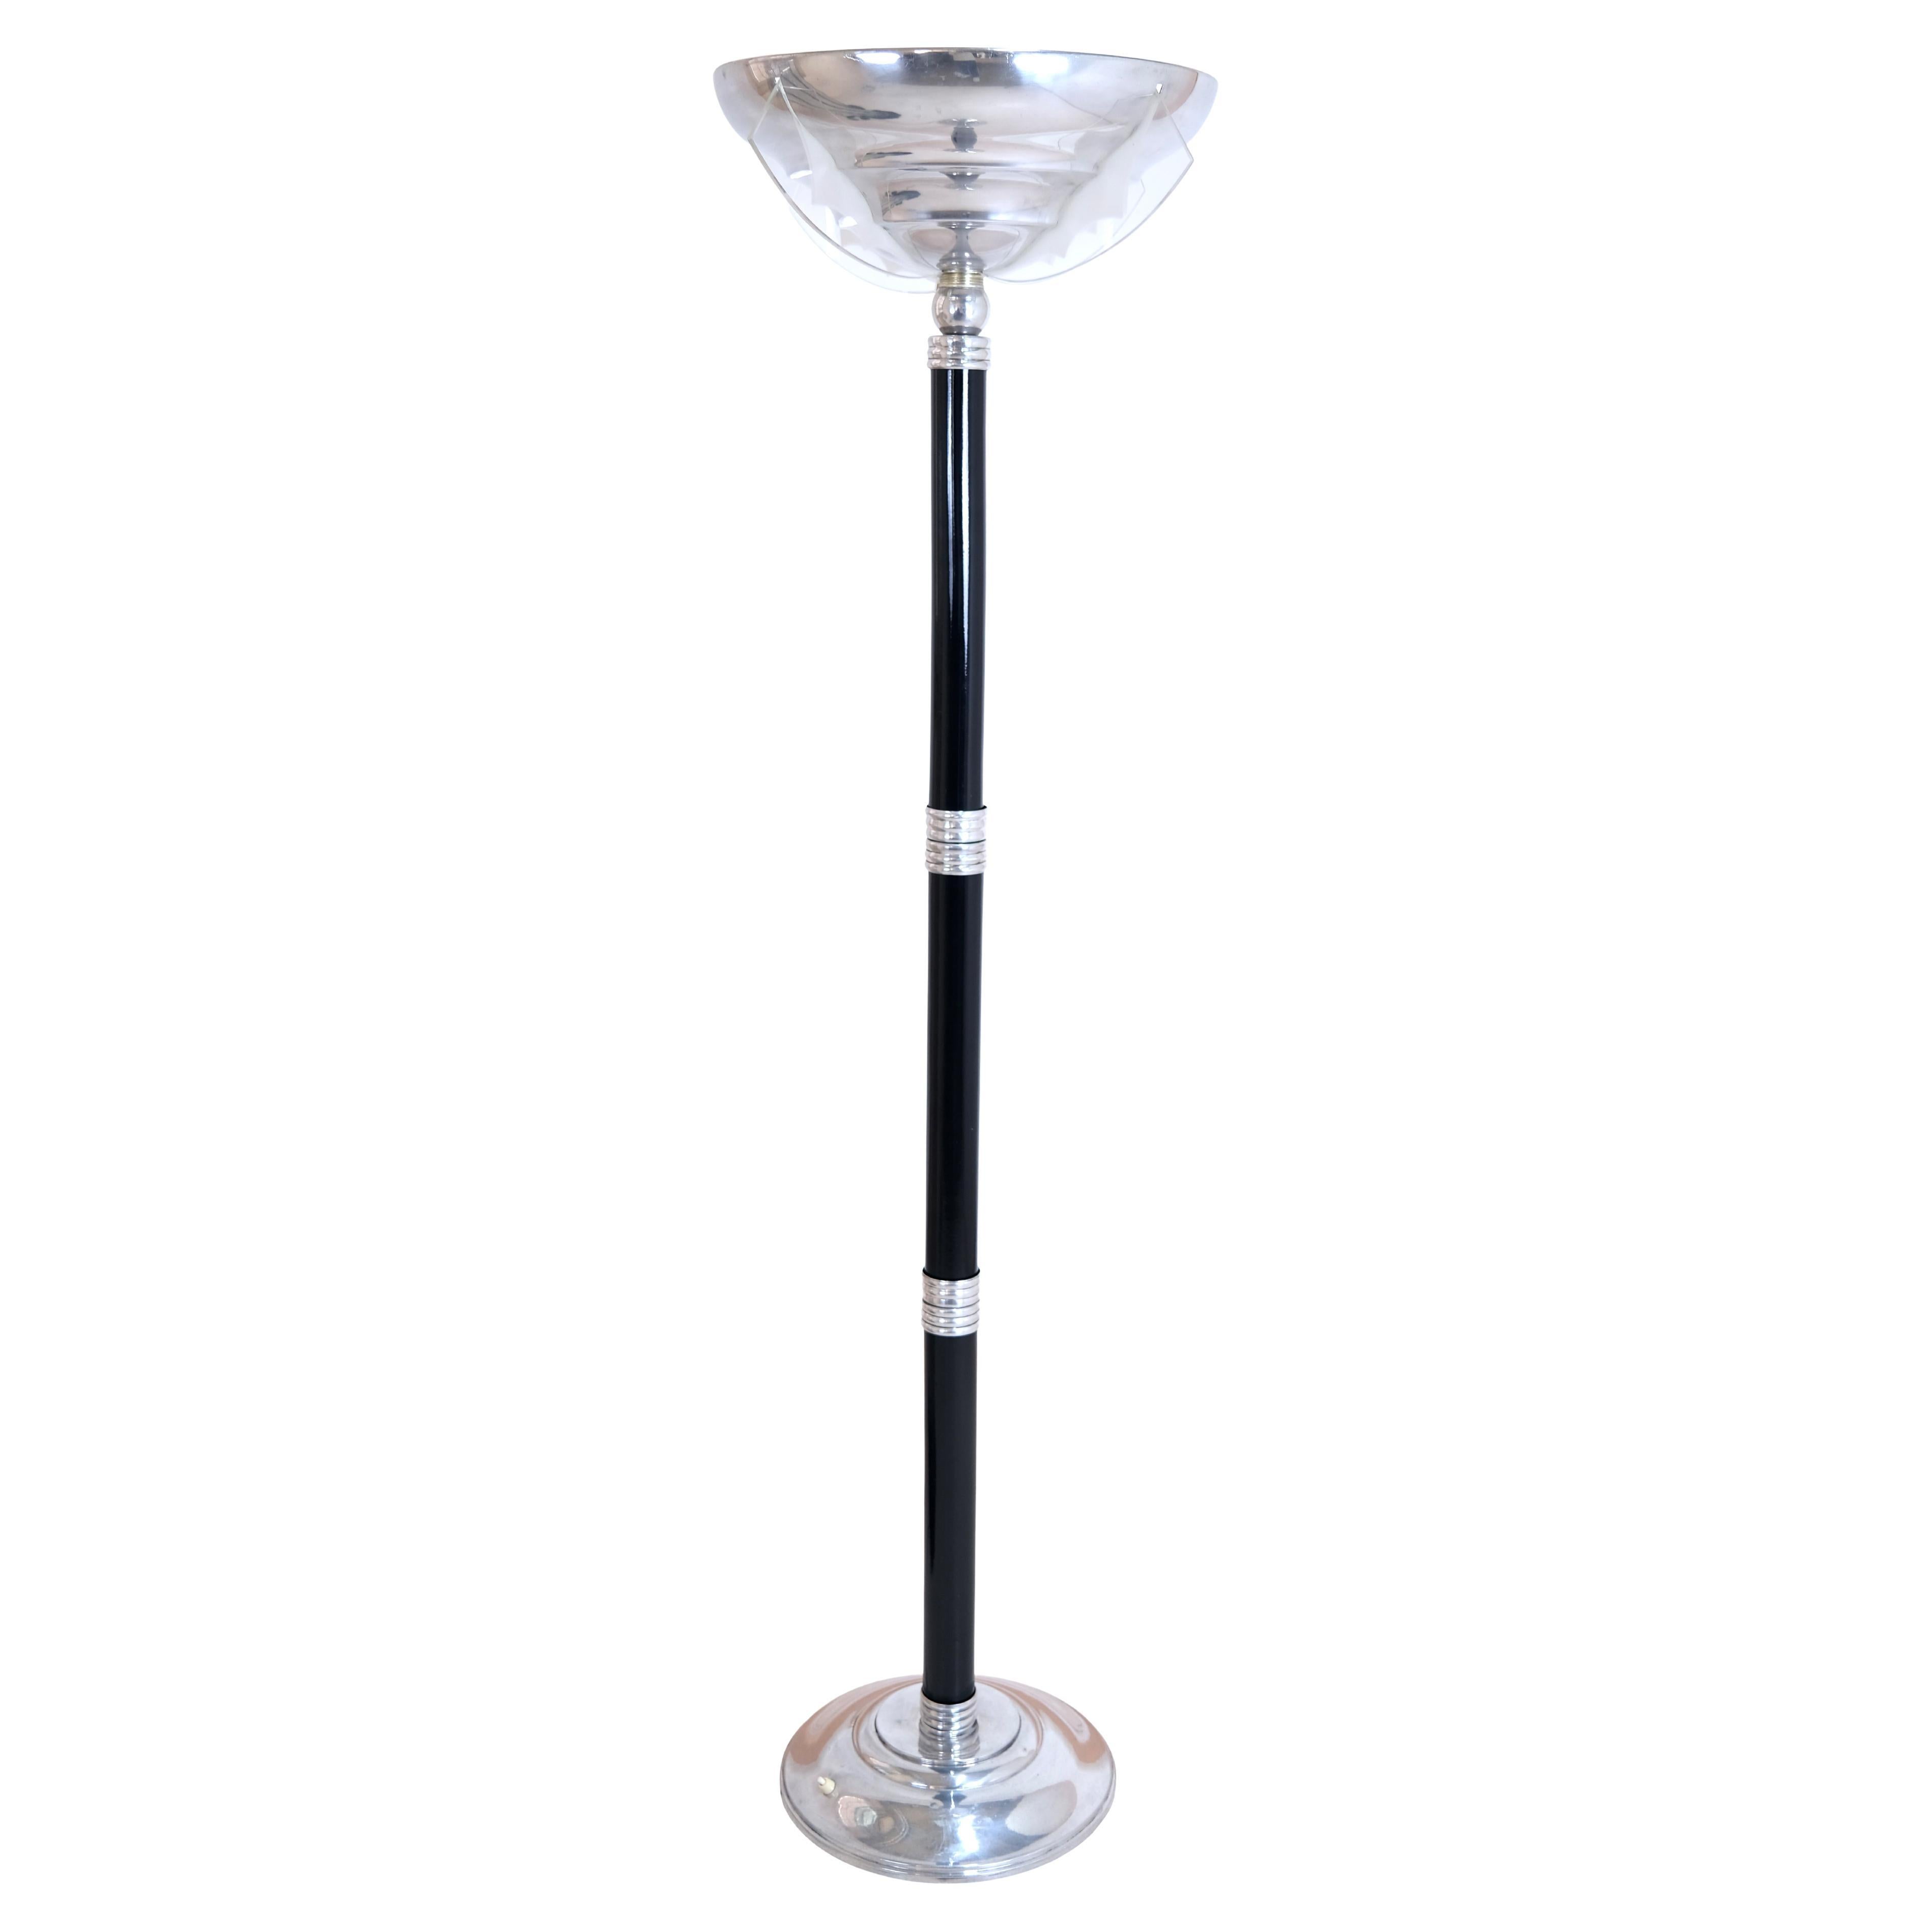 Art Deco Floor Lamp with Black Stem Chromed Shade and Base and Glass Panels